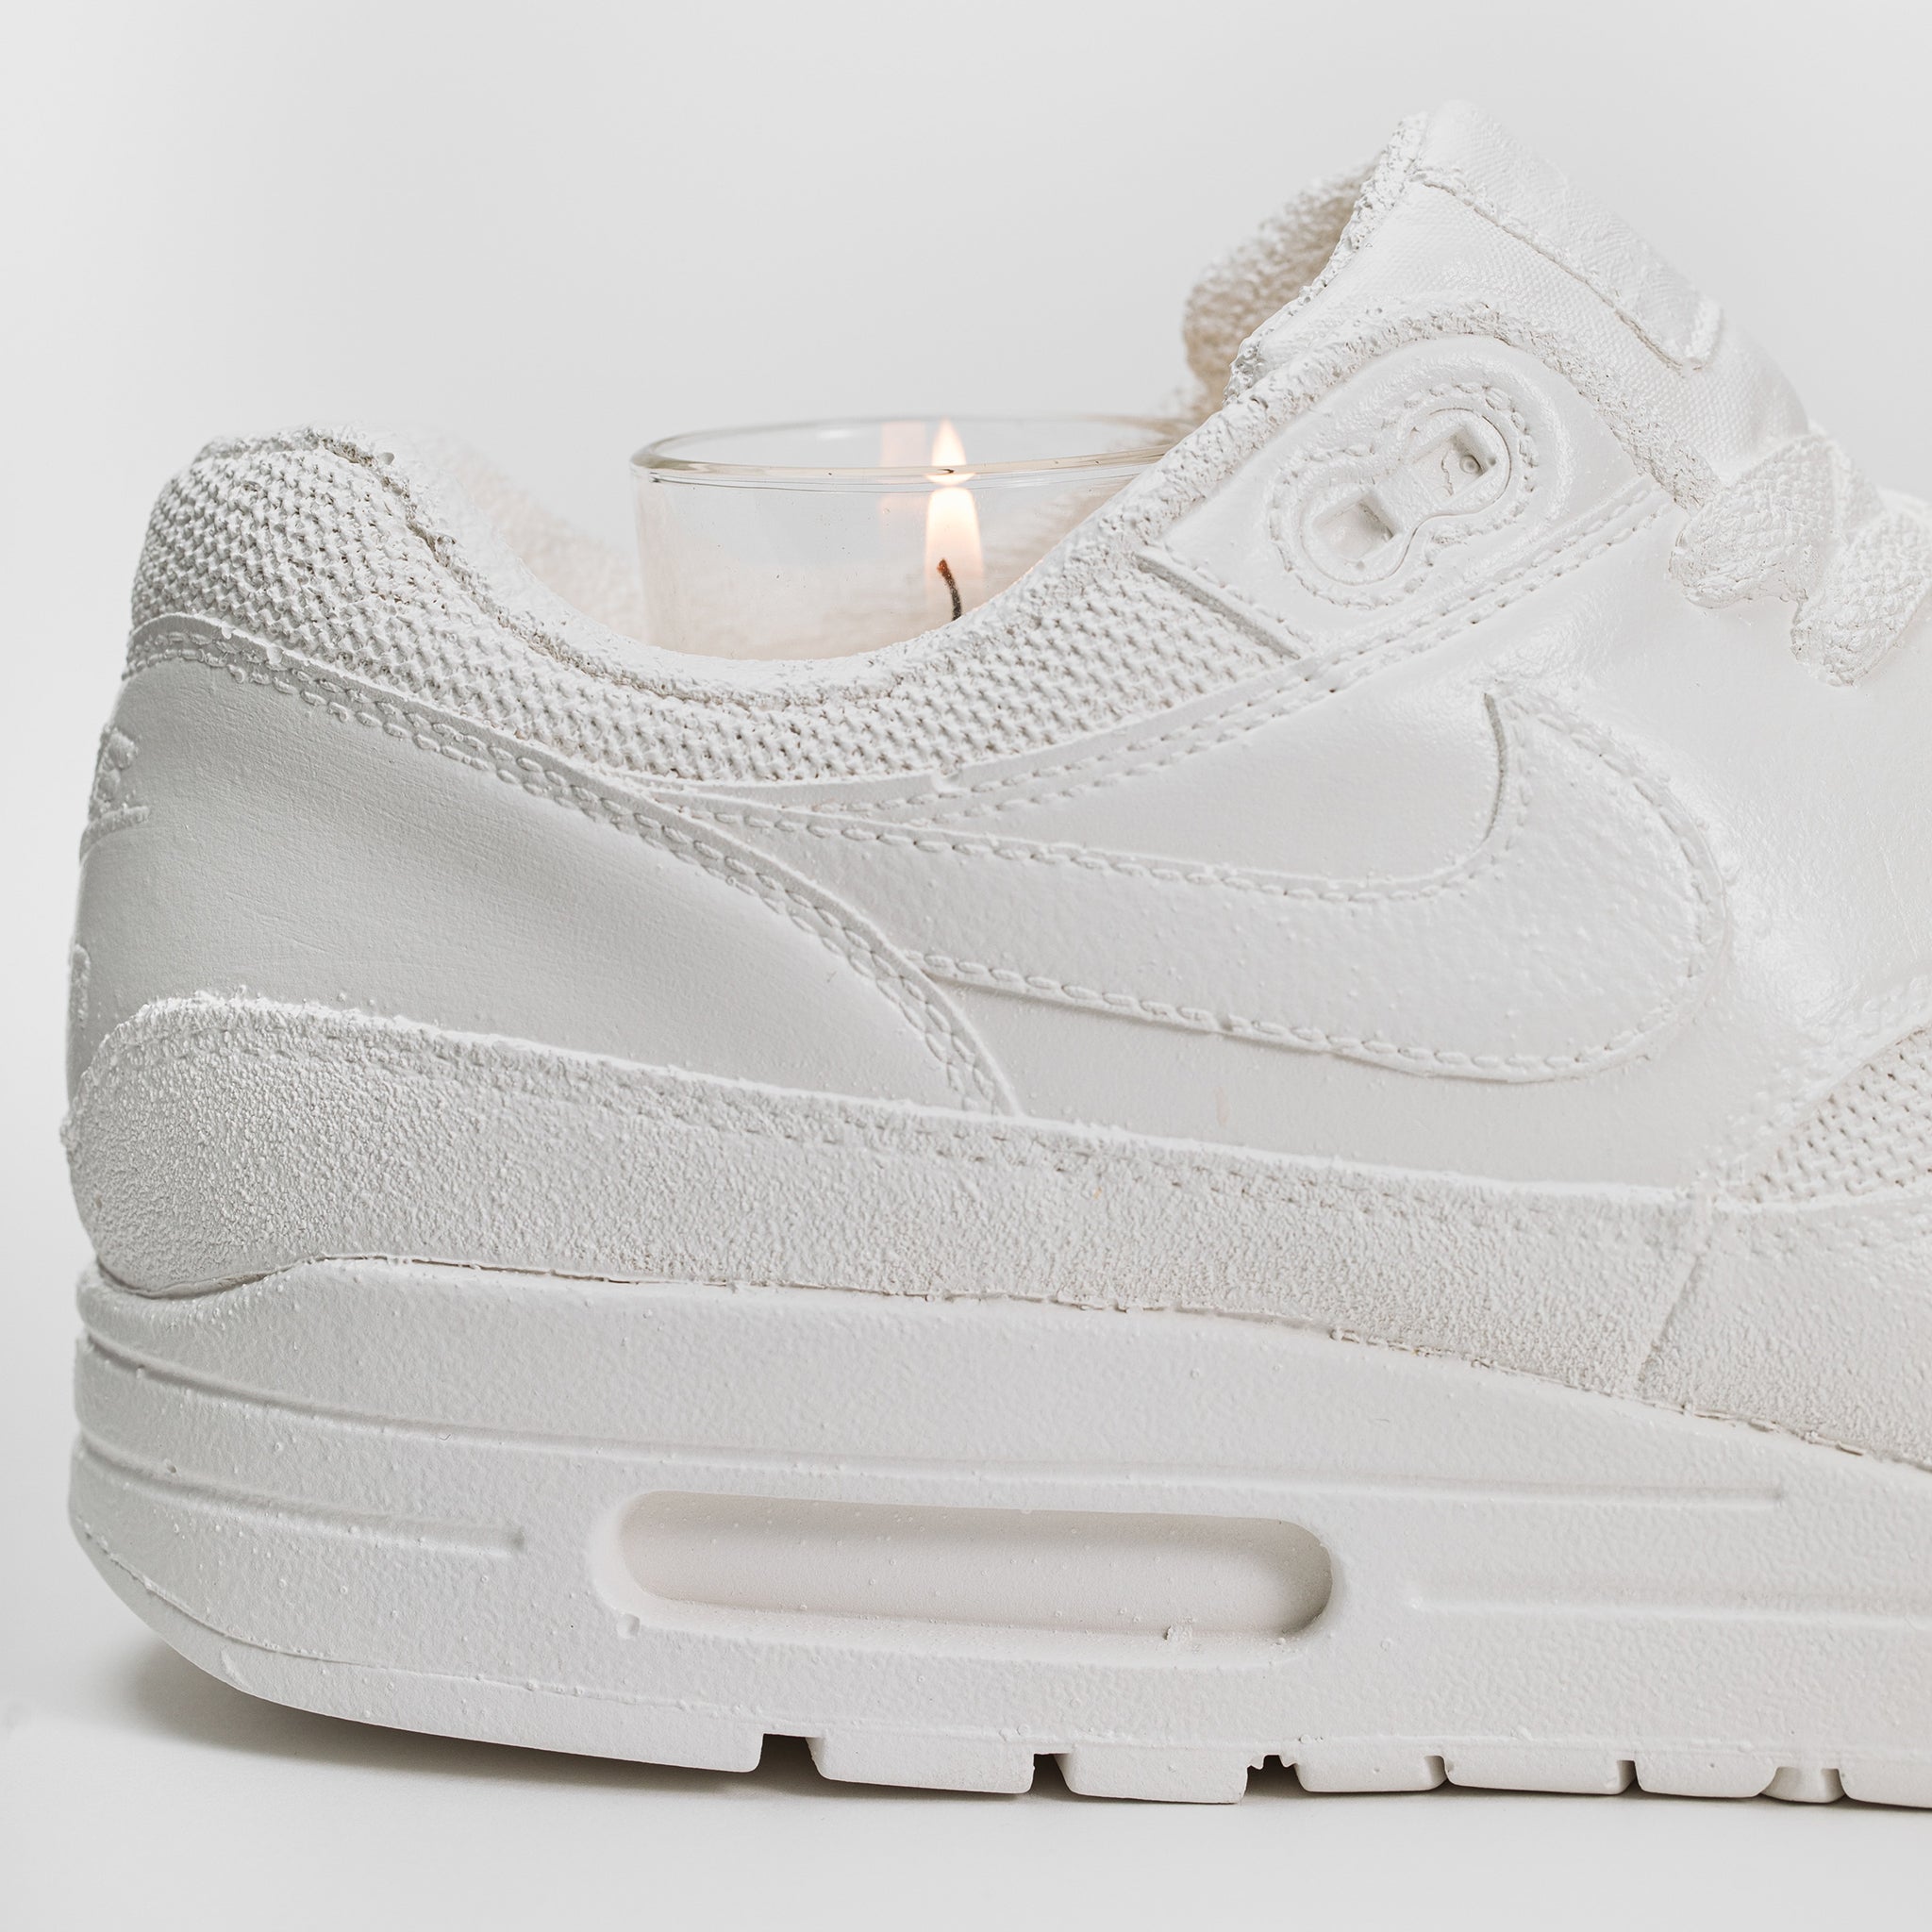 Up close die view of Nike Air Max concrete candle holder with votive candle